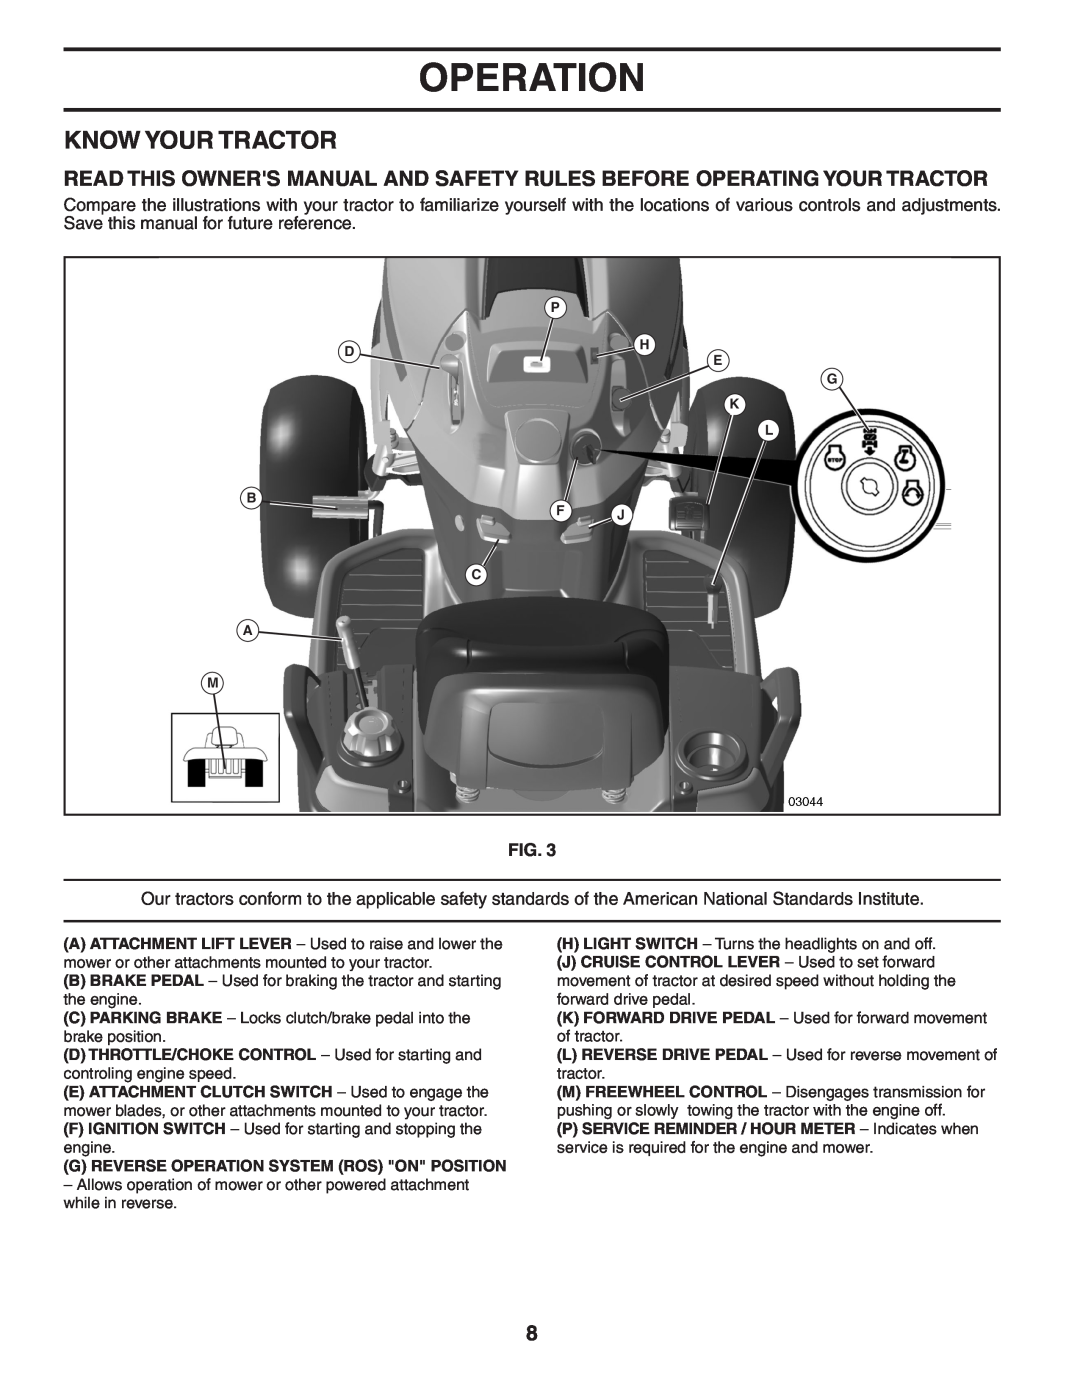 Husqvarna YTH20F42T owner manual Know Your Tractor, G Reverse Operation System Ros On Position 